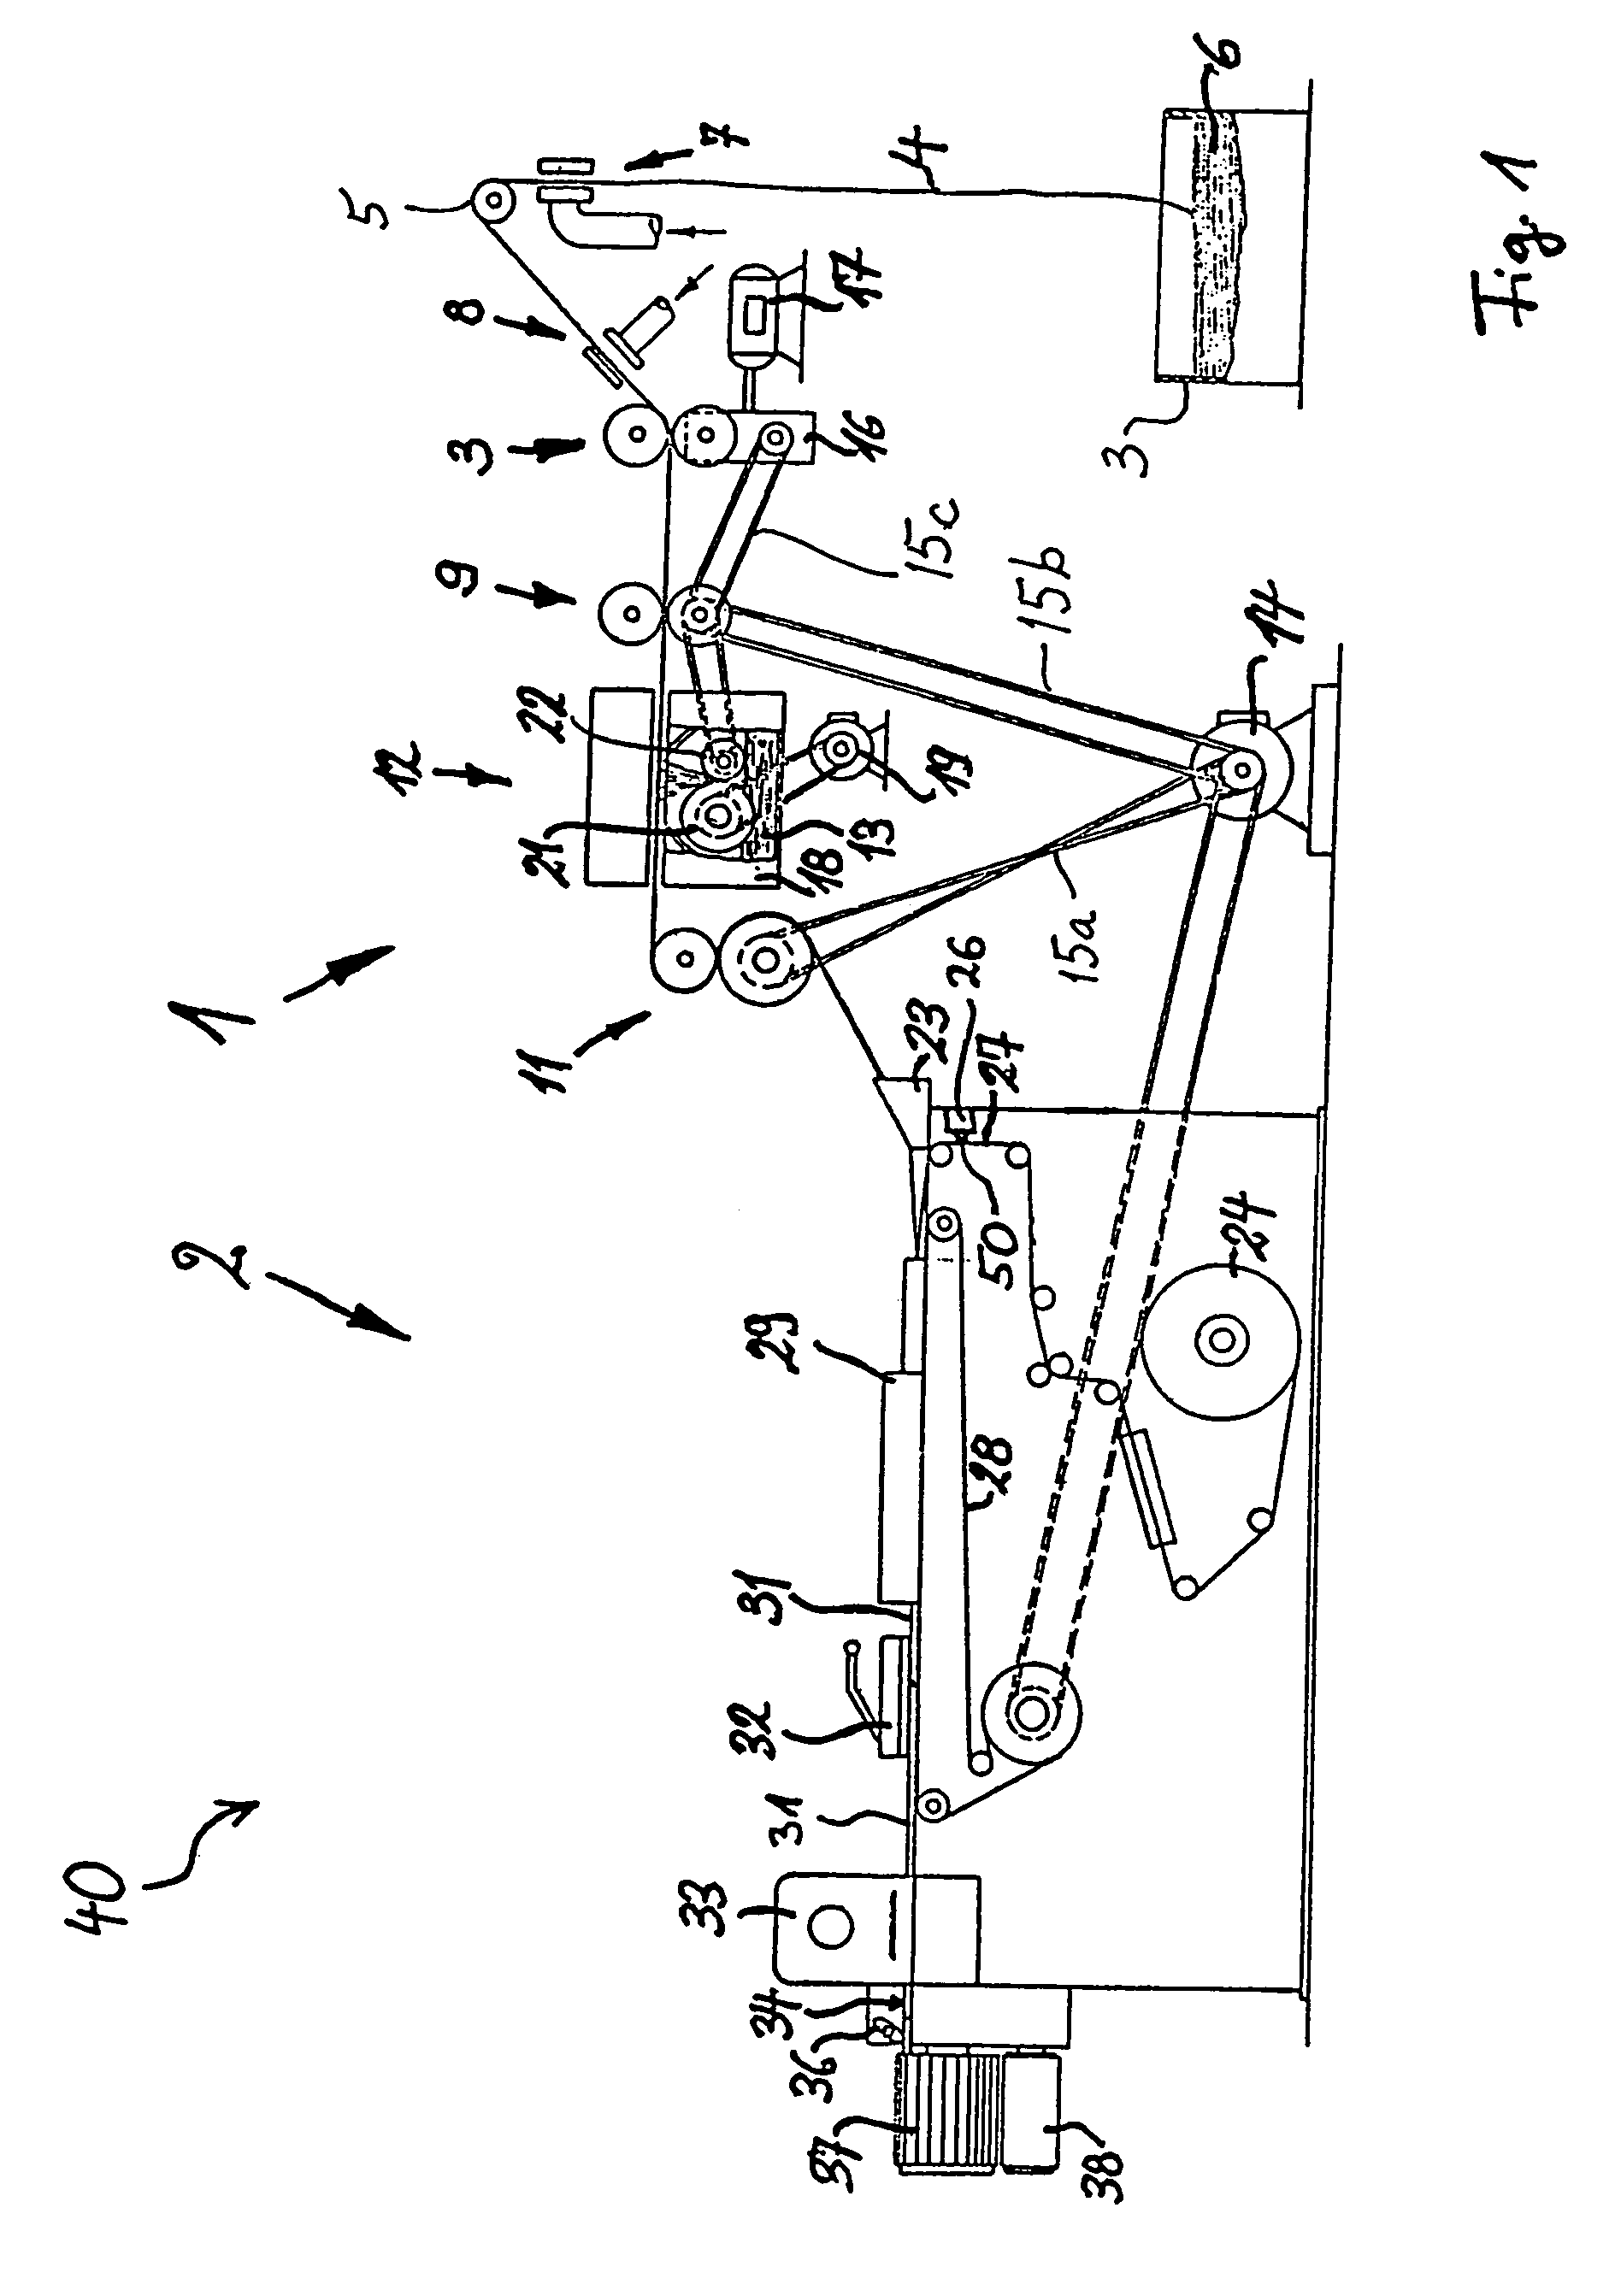 Method of and apparatus for applying adhesive to running webs of paper and the like